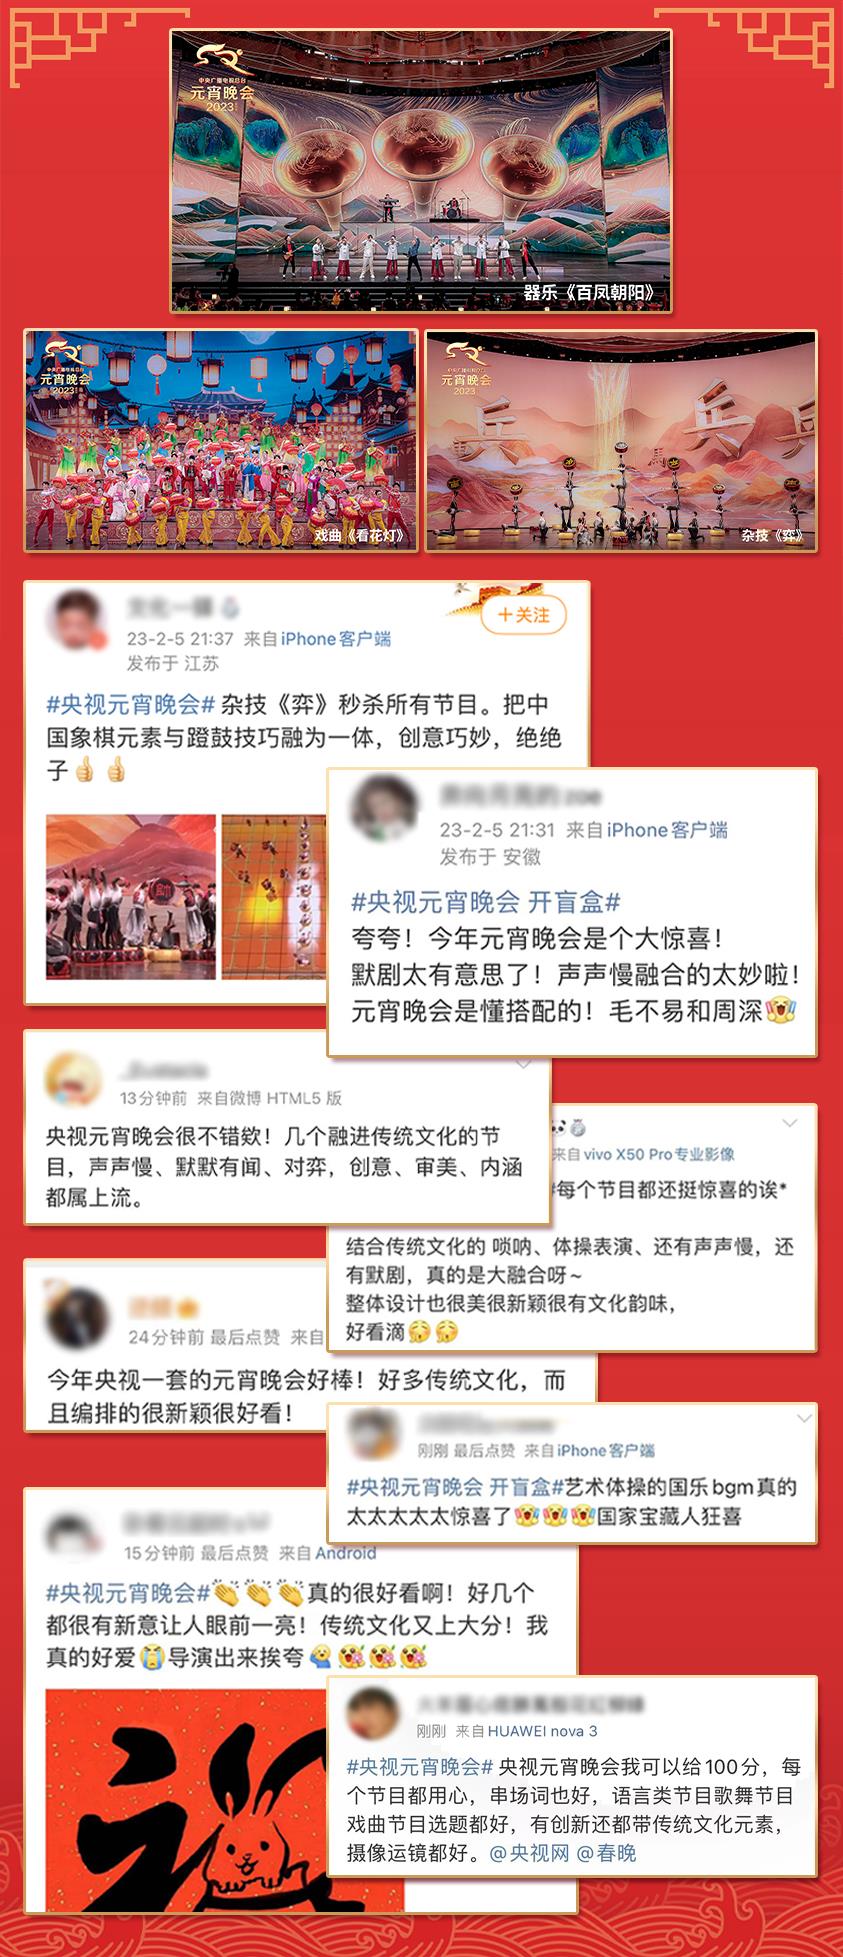 Some of the comments of the Lantern Festival Gala by Chinese audiences. /CMG